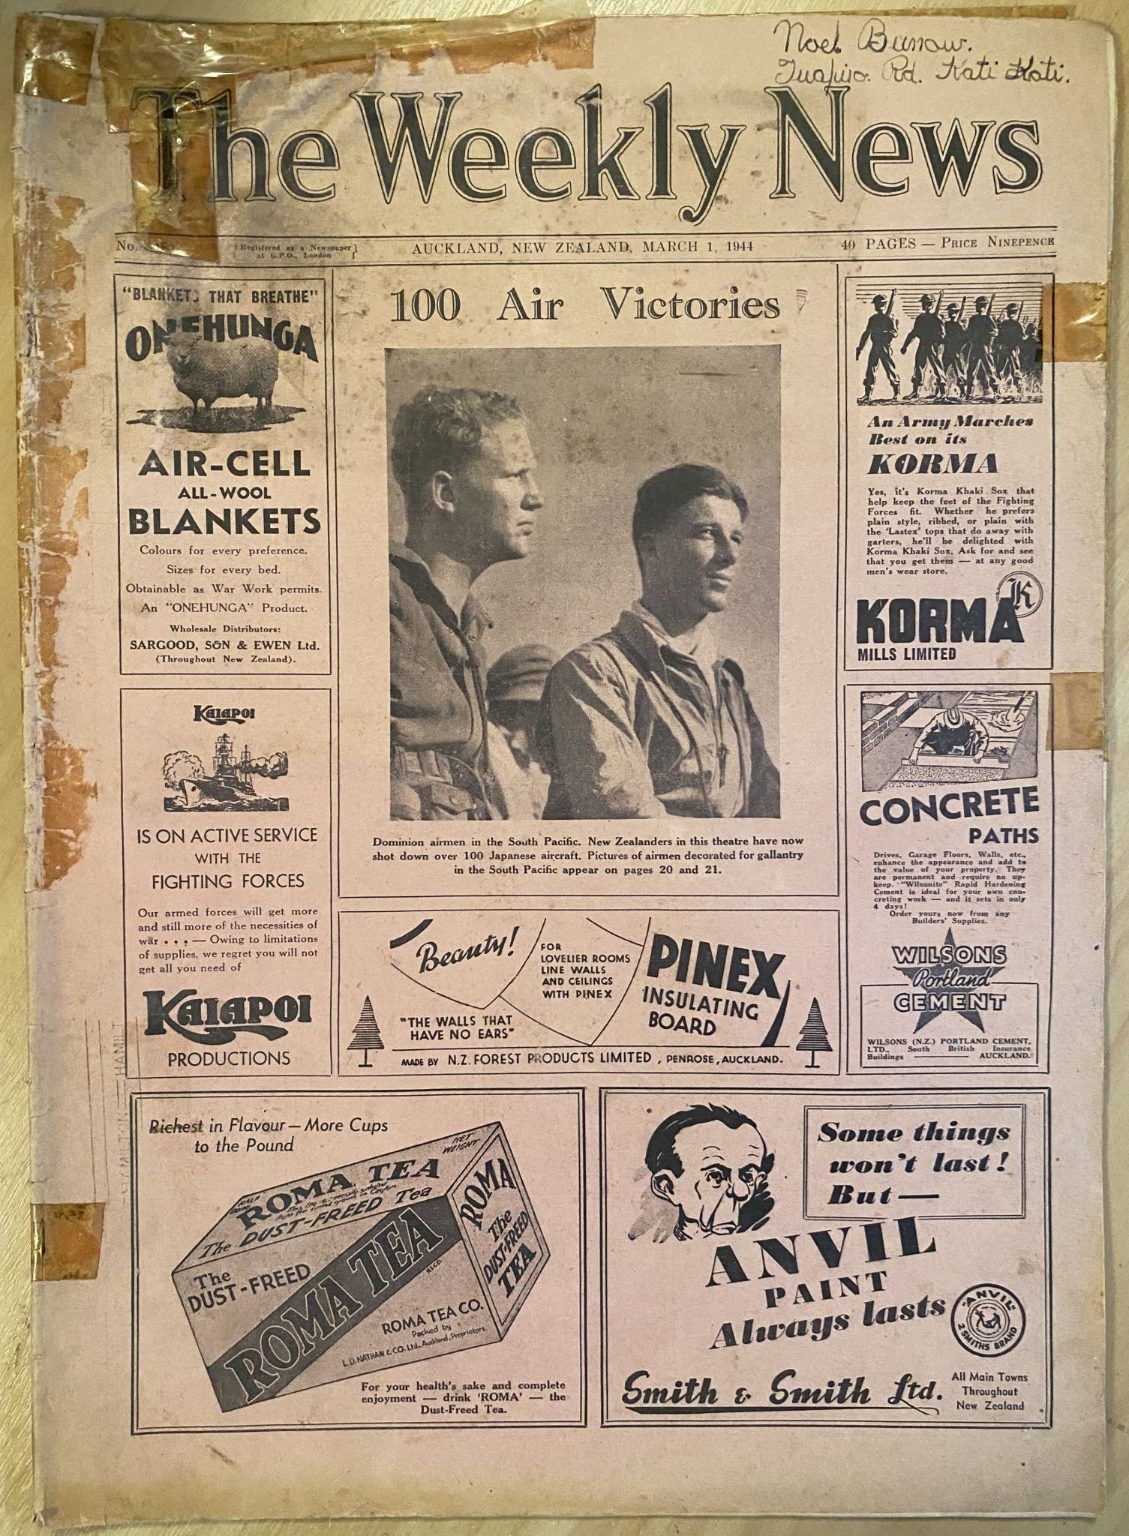 OLD NEWSPAPER: The Weekly News - No. 4188, 1 March 1944